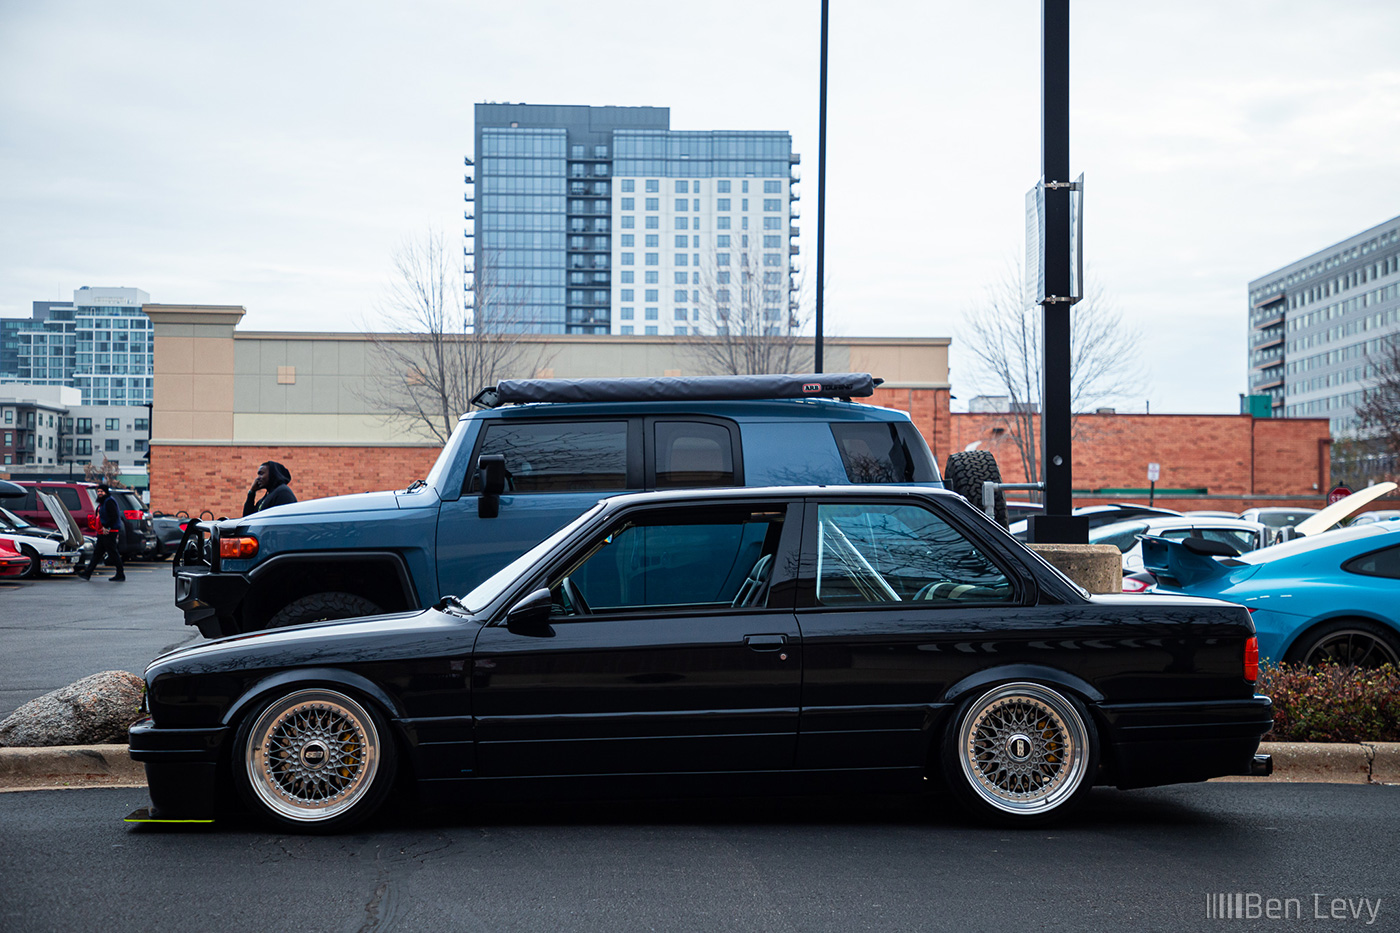 Aggresive Stance on Black E30 BMW